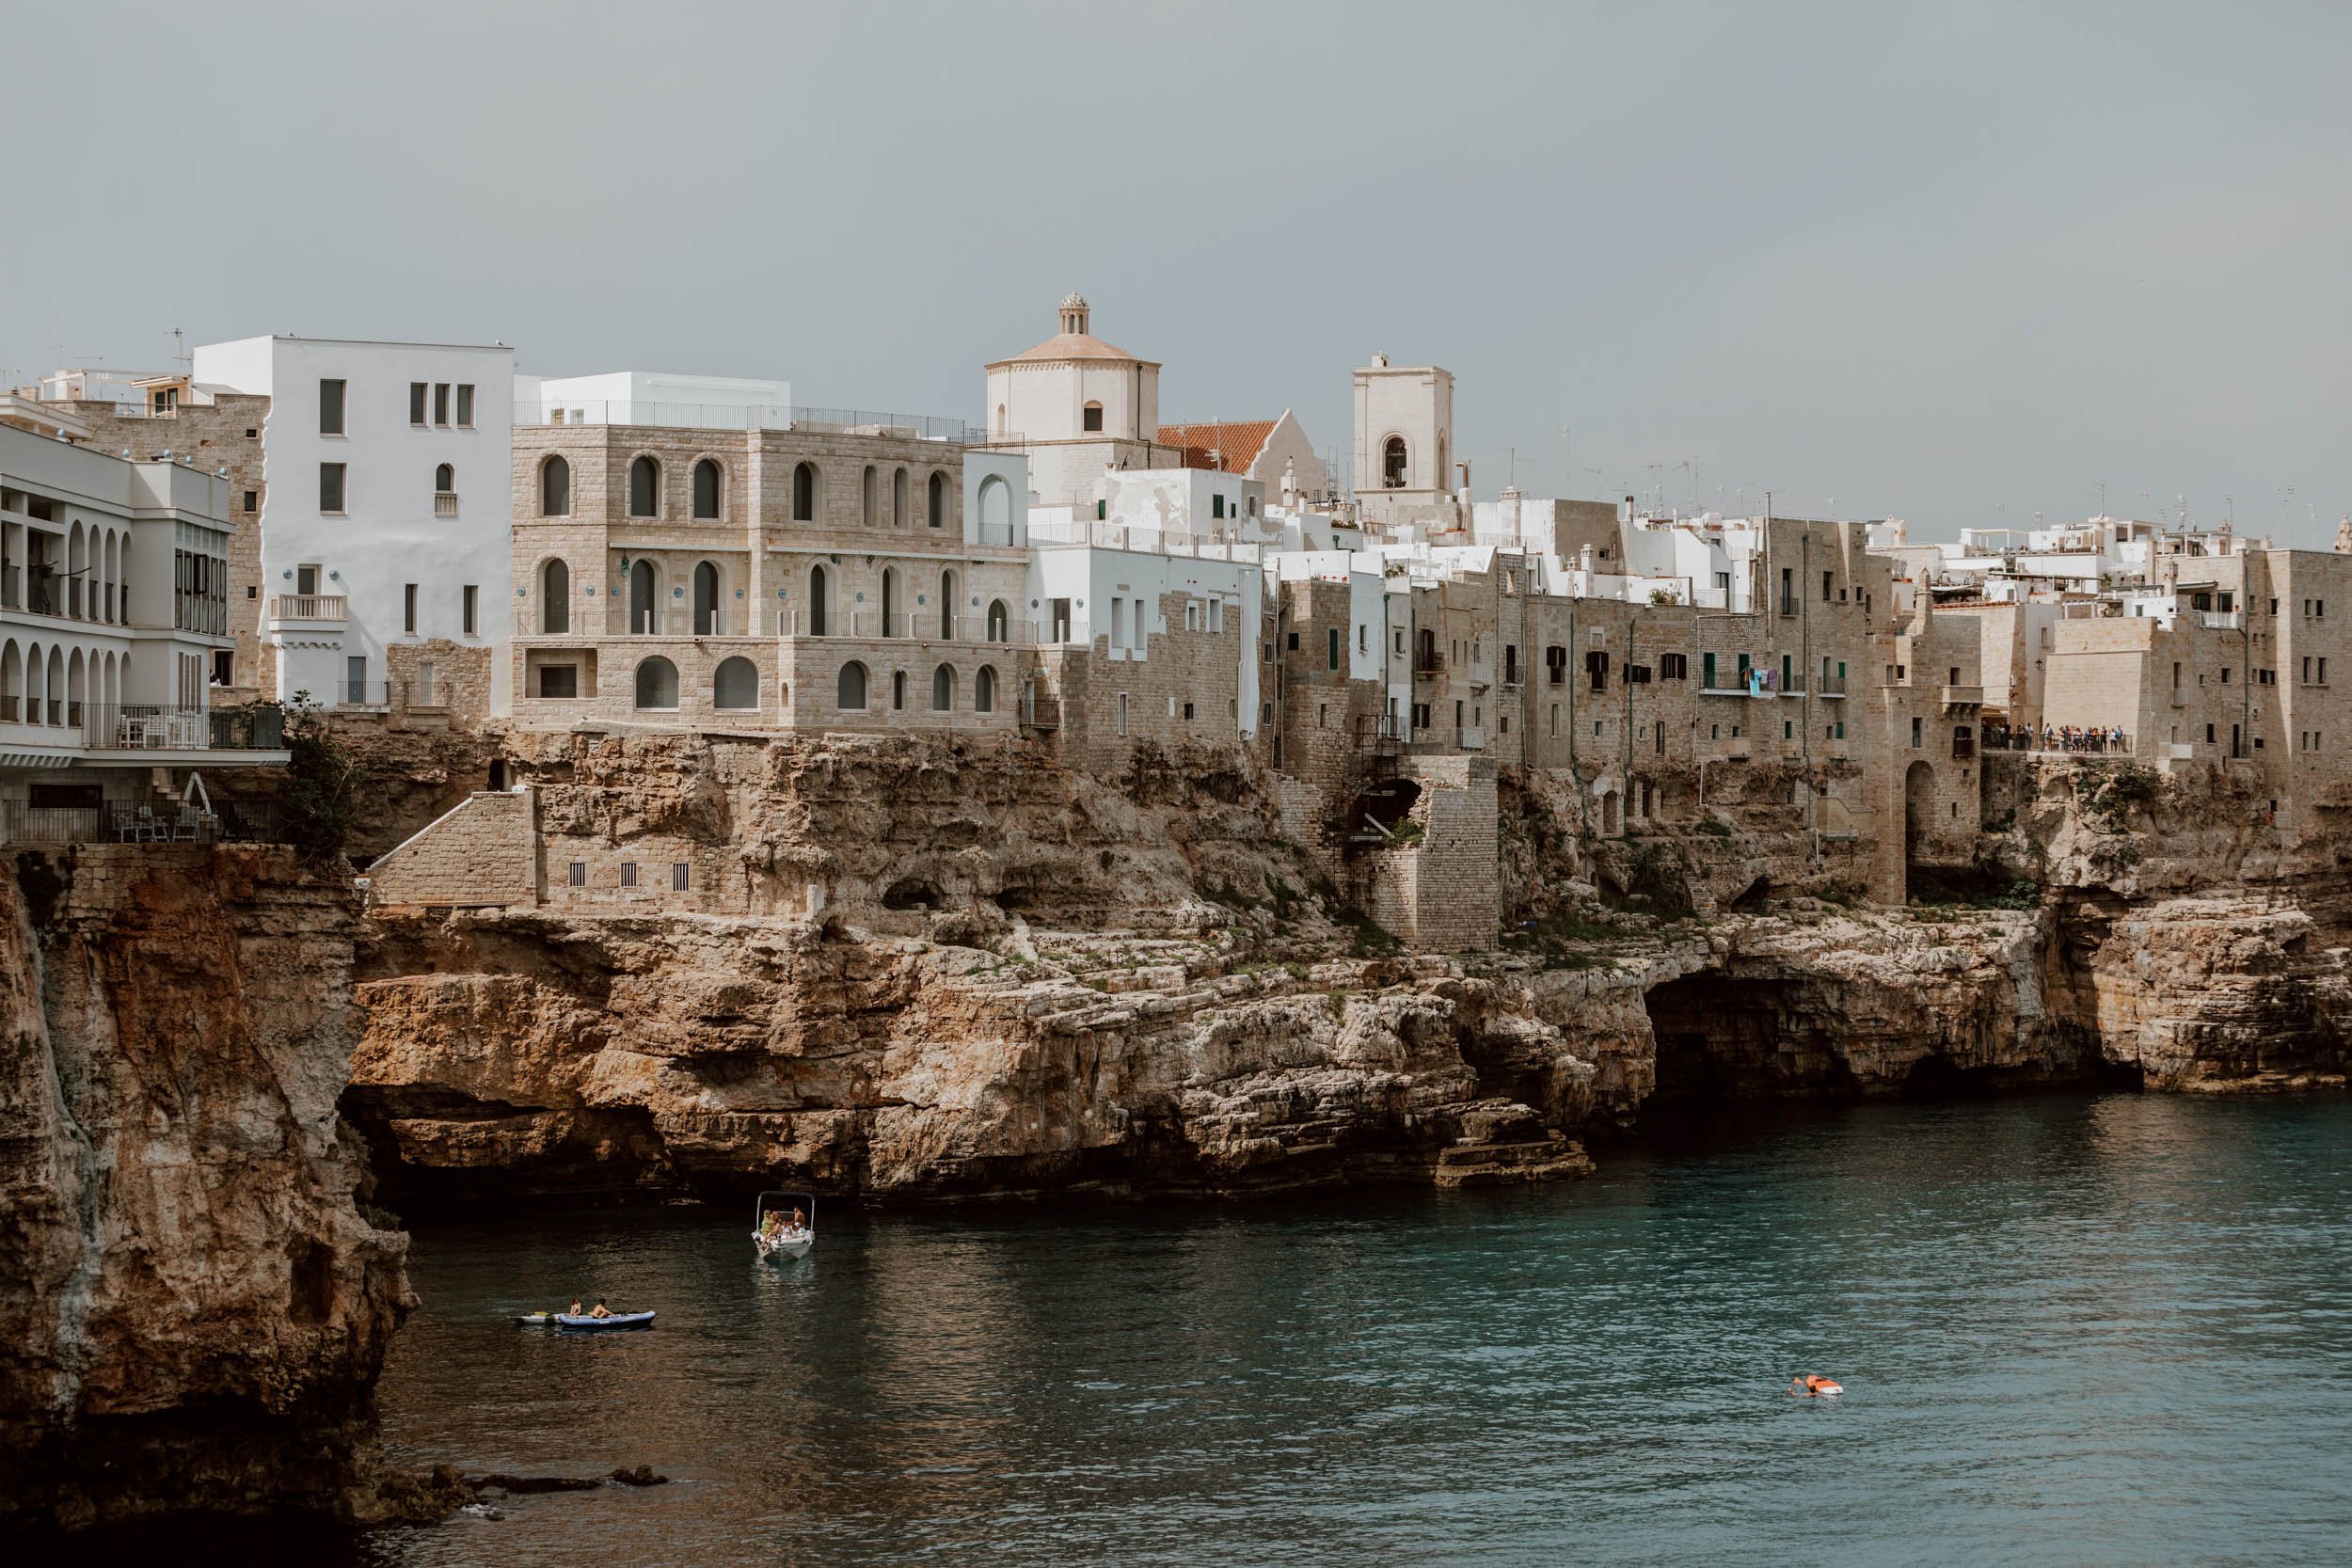 13 Wonderful Things to Do in Polignano a Mare, Italy | More Than a Famous Beach